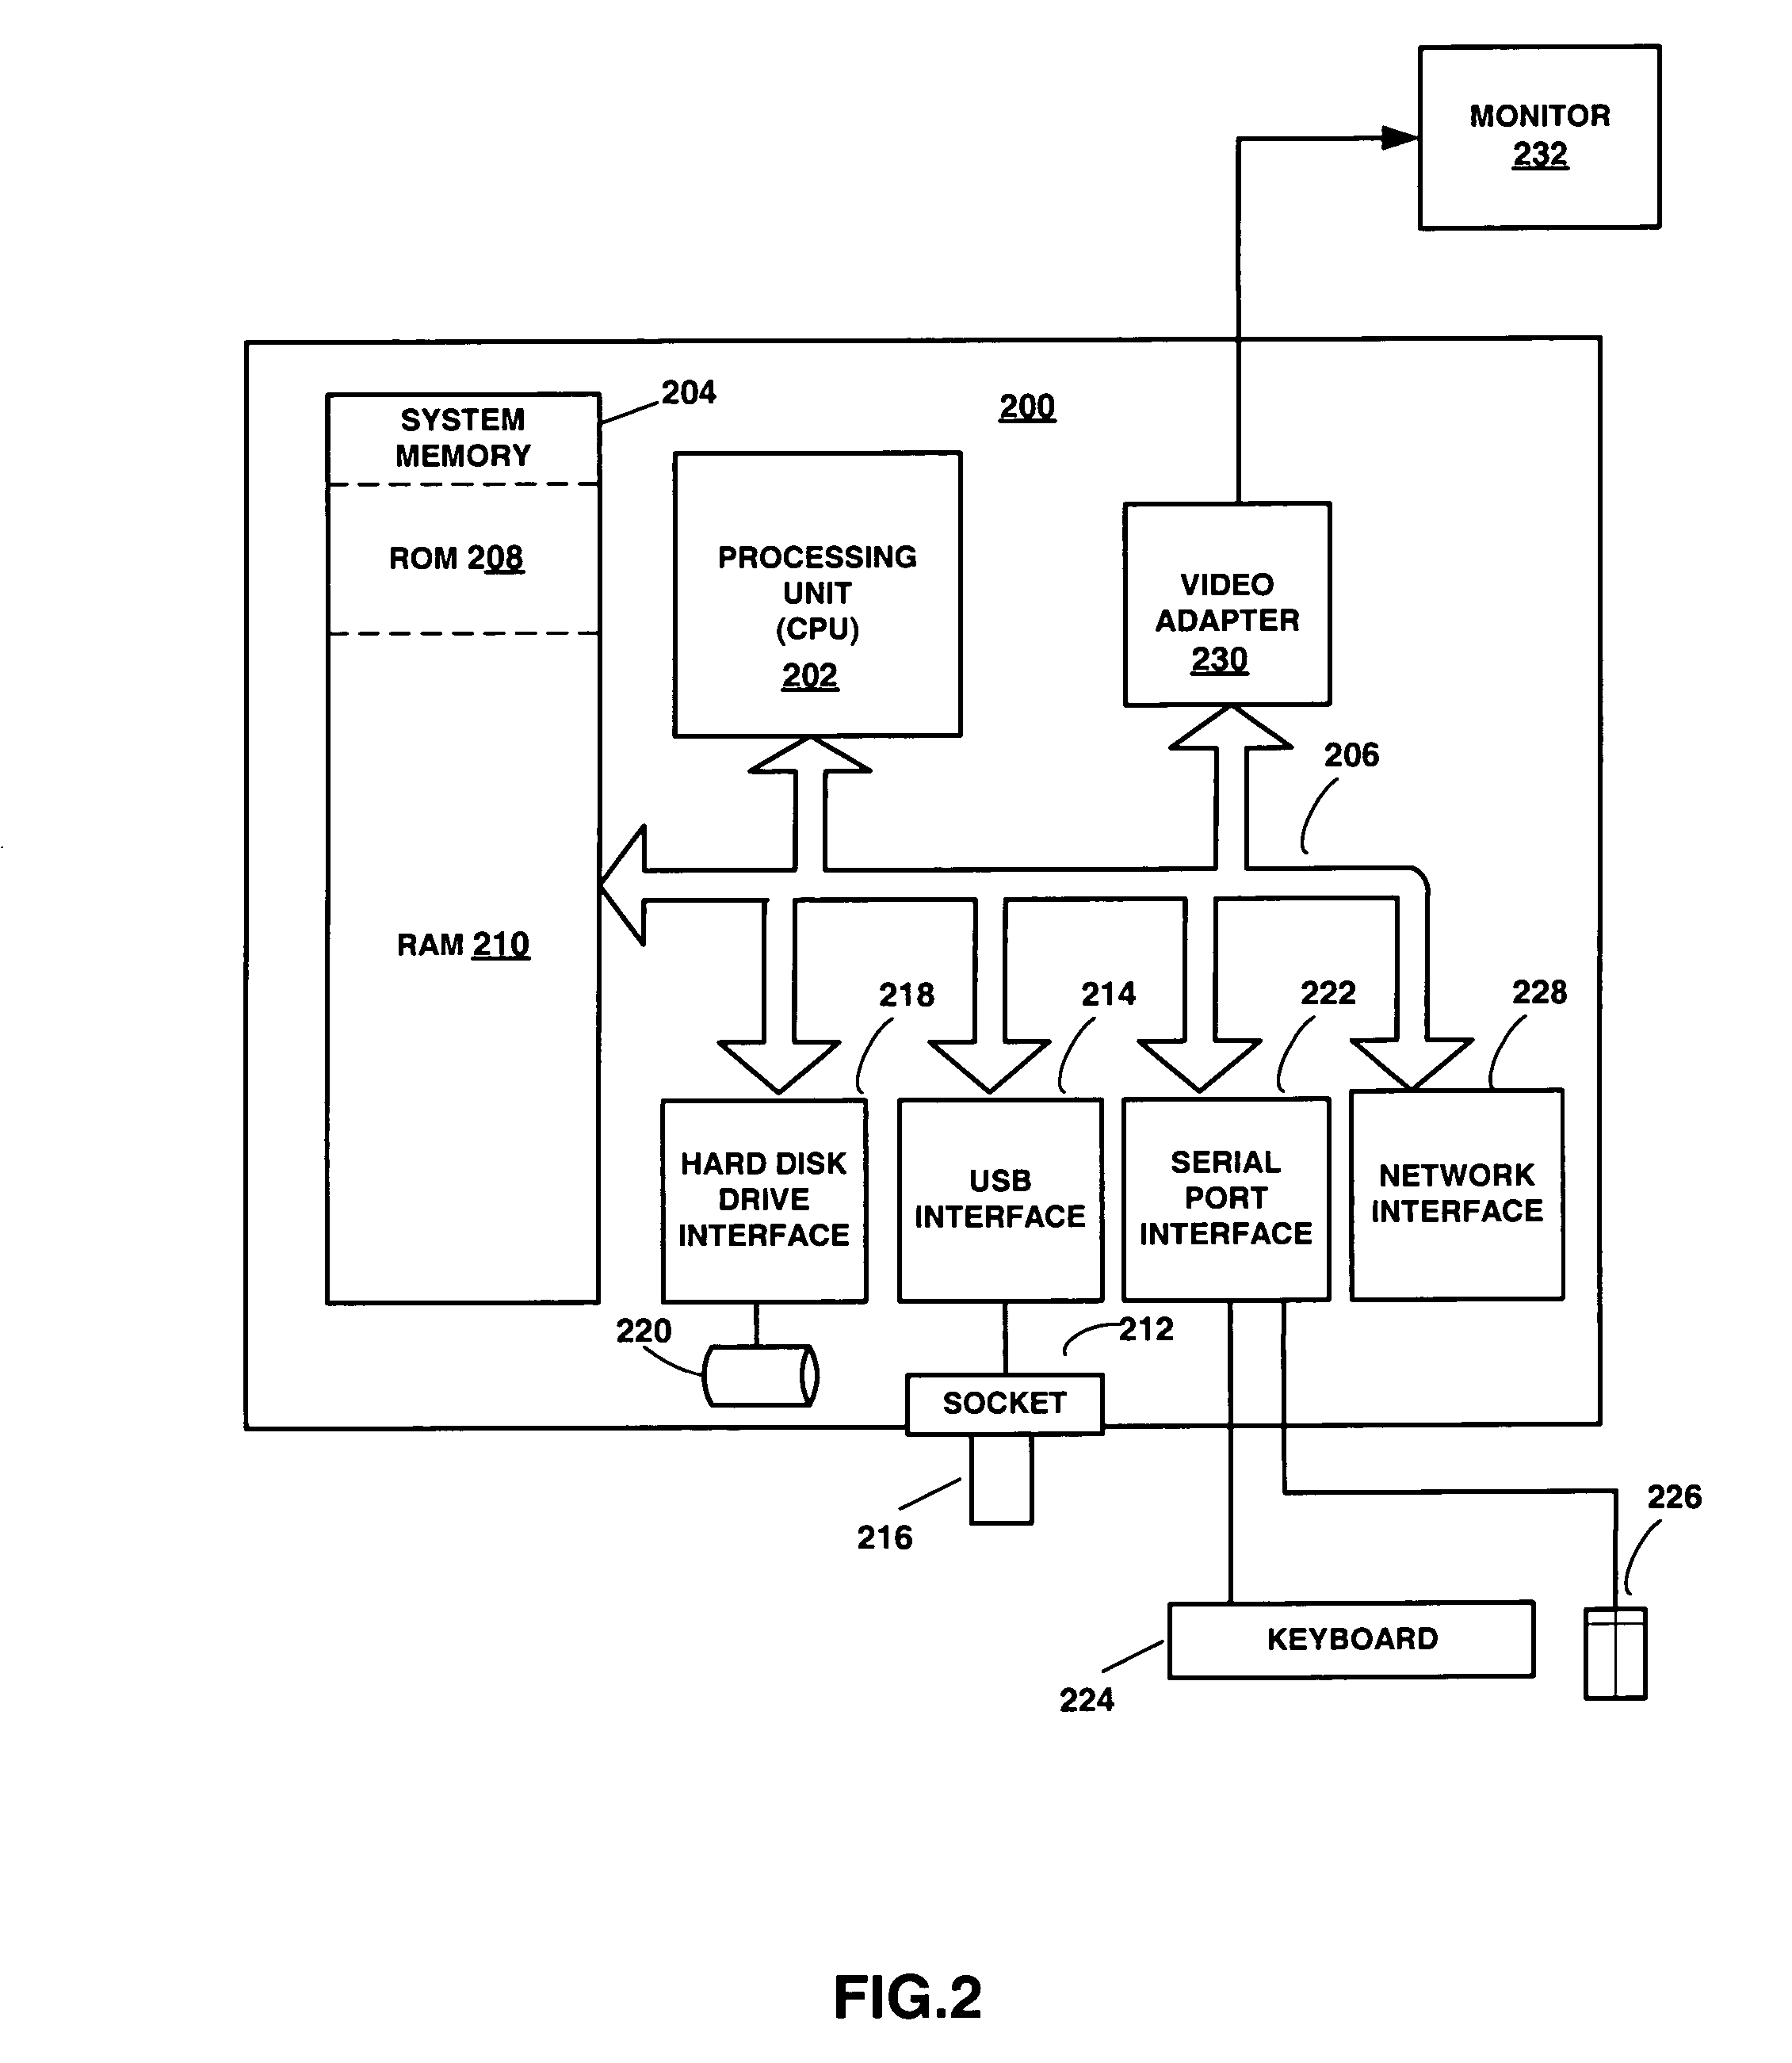 Point of sale business transaction data gathering using portable memory device